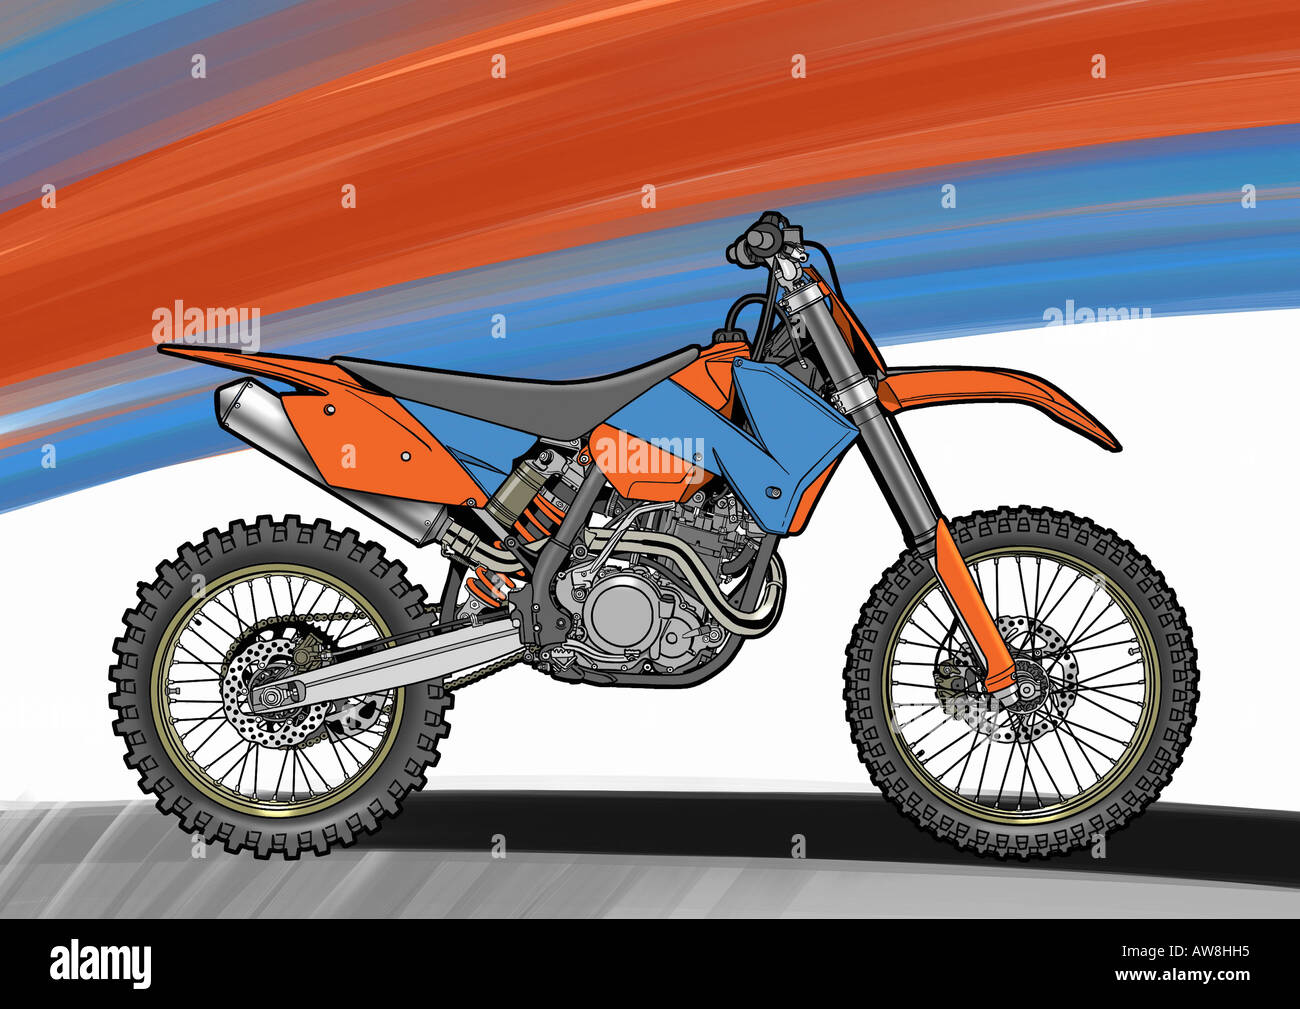 Red and blue motocross motorbike Stock Photo - Alamy